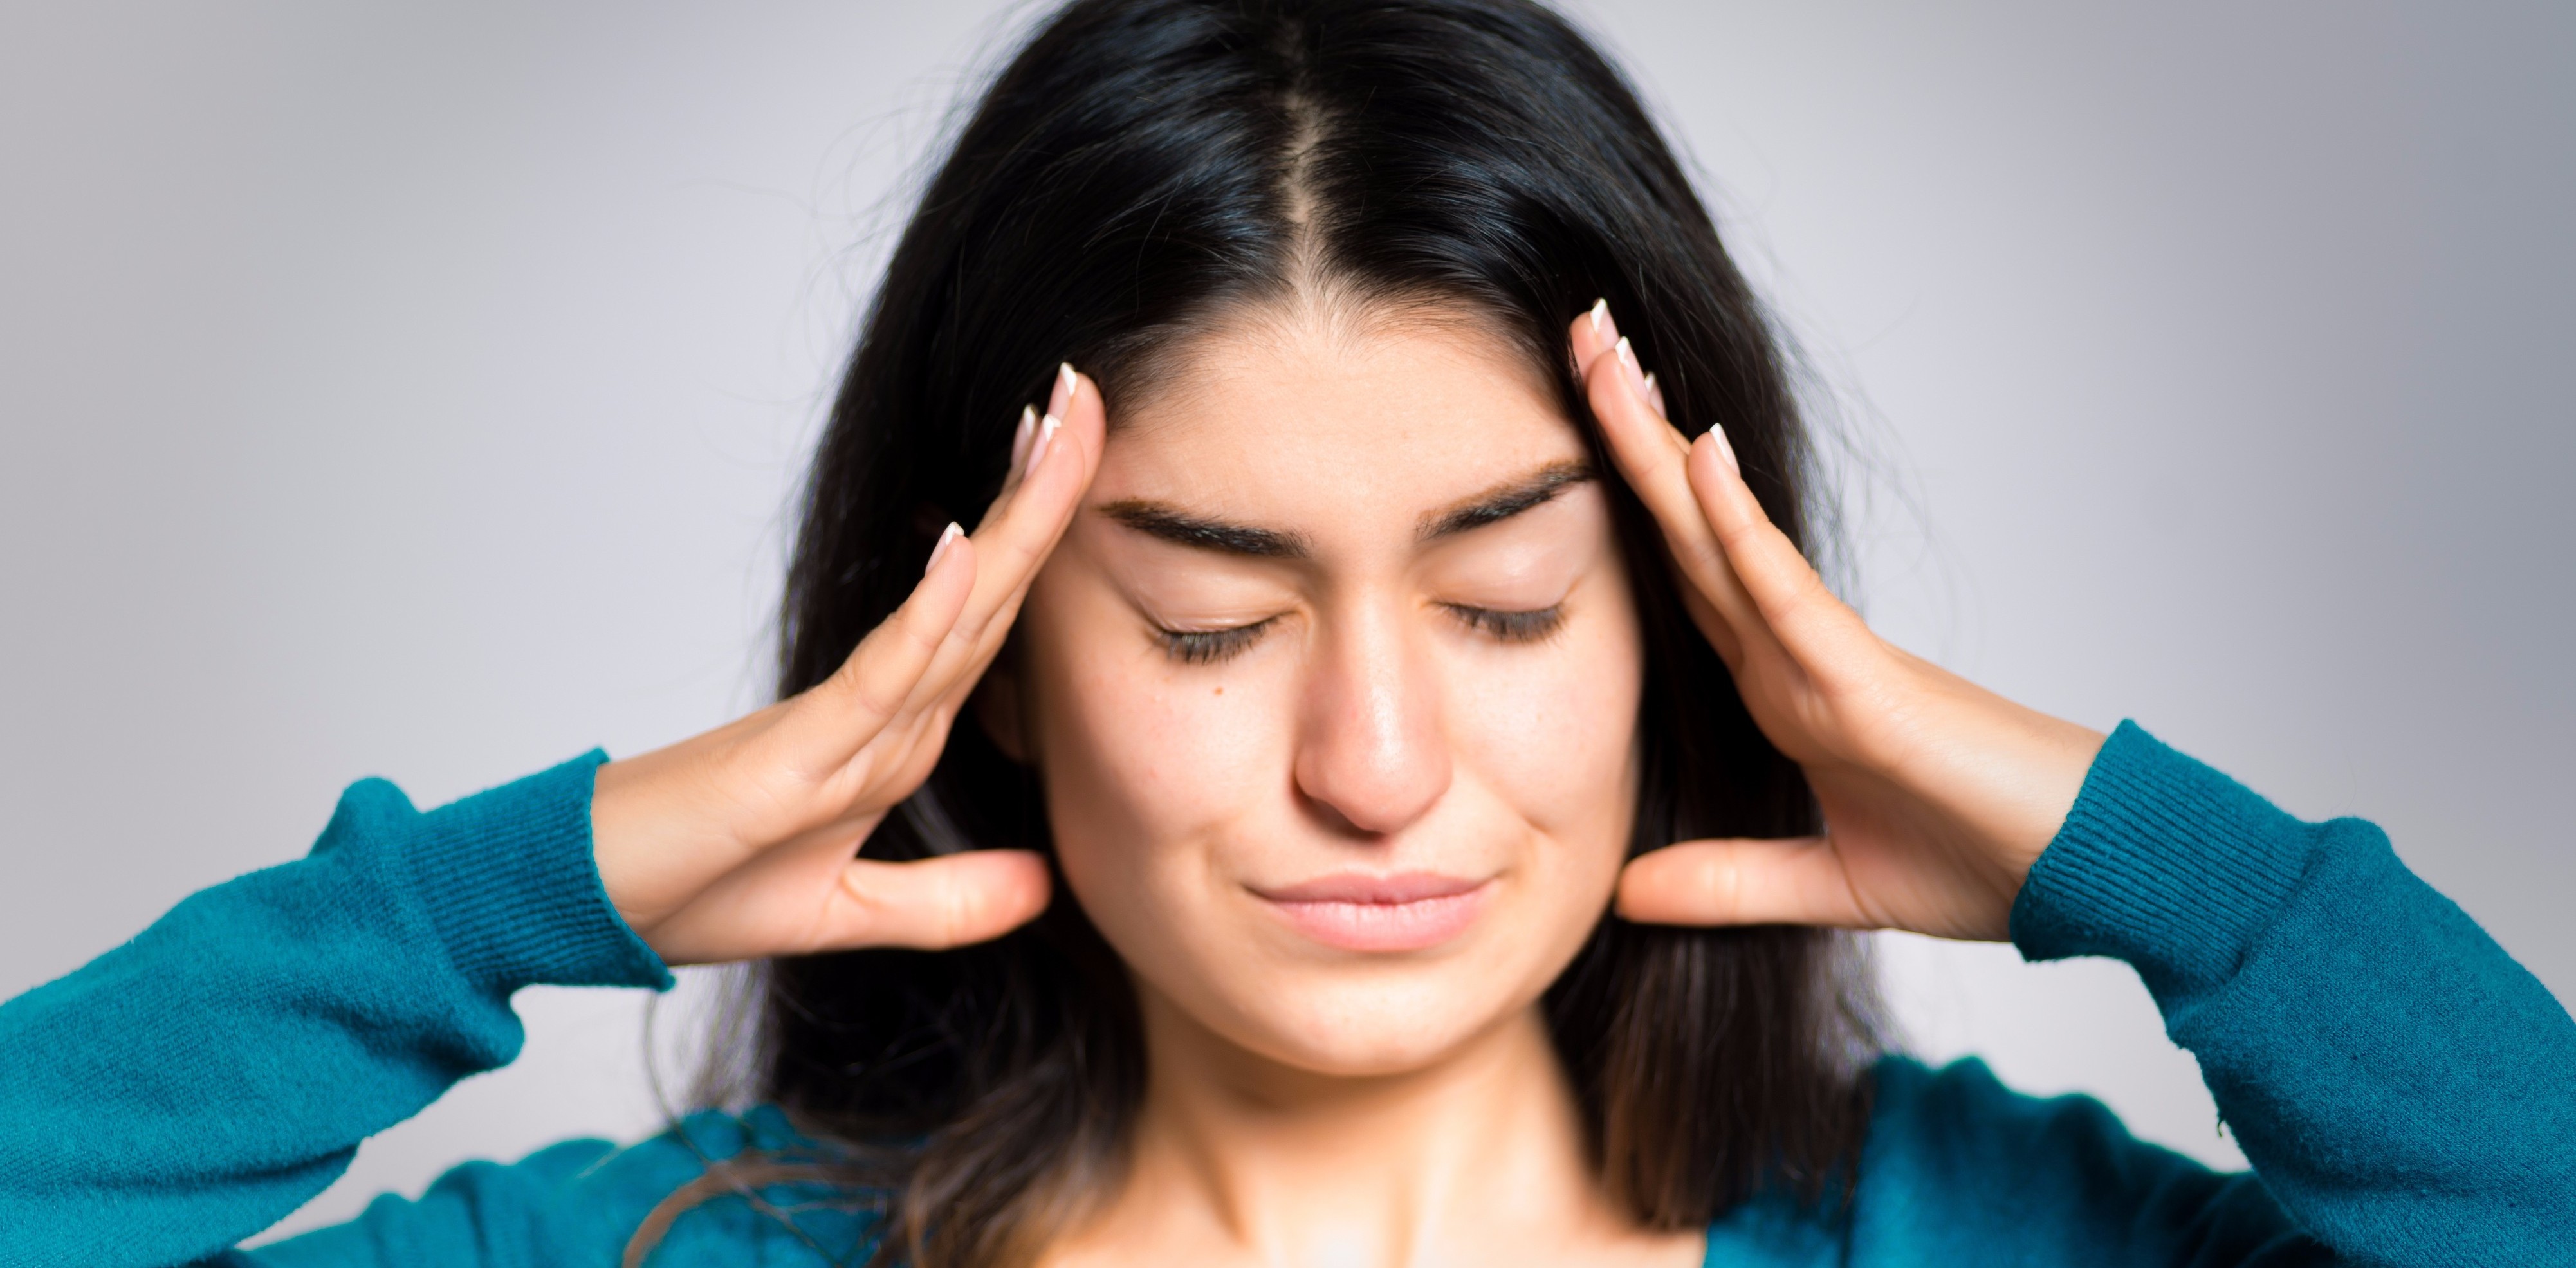 8 natural ways to relieve your headache